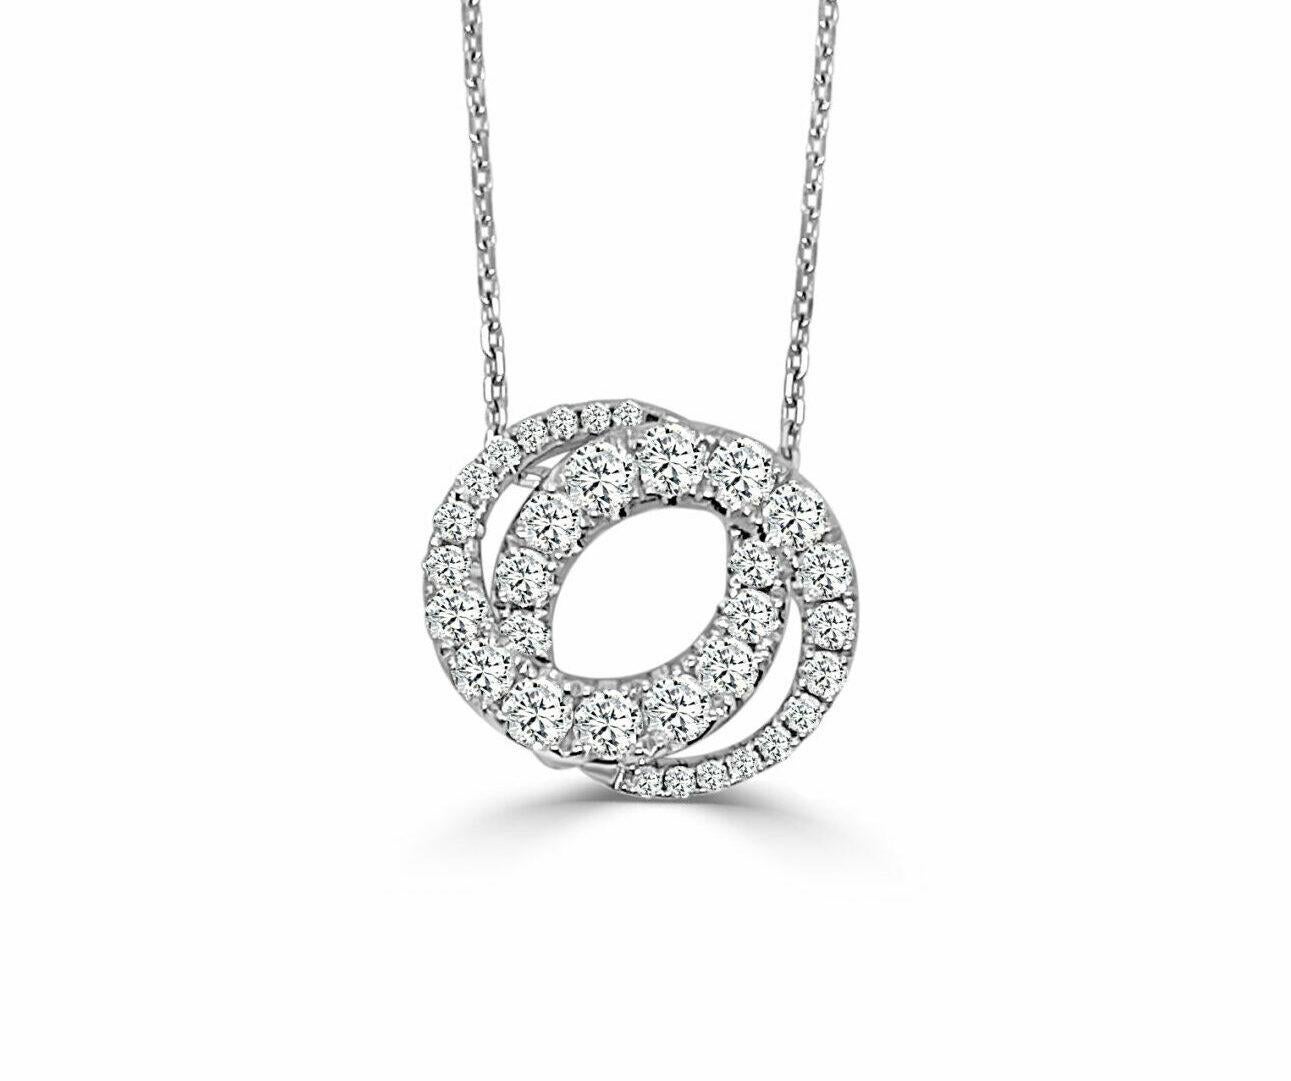 Medium All Diamond Love Halo With Hidden Bale Pendant With Chain, 0.94 Ct. approx 17mm x 14mm

Available in other metal/ gemstone options: This Diamond pendant can be made in white, pink or yellow gold. 
Matching earrings, bangle and ring available